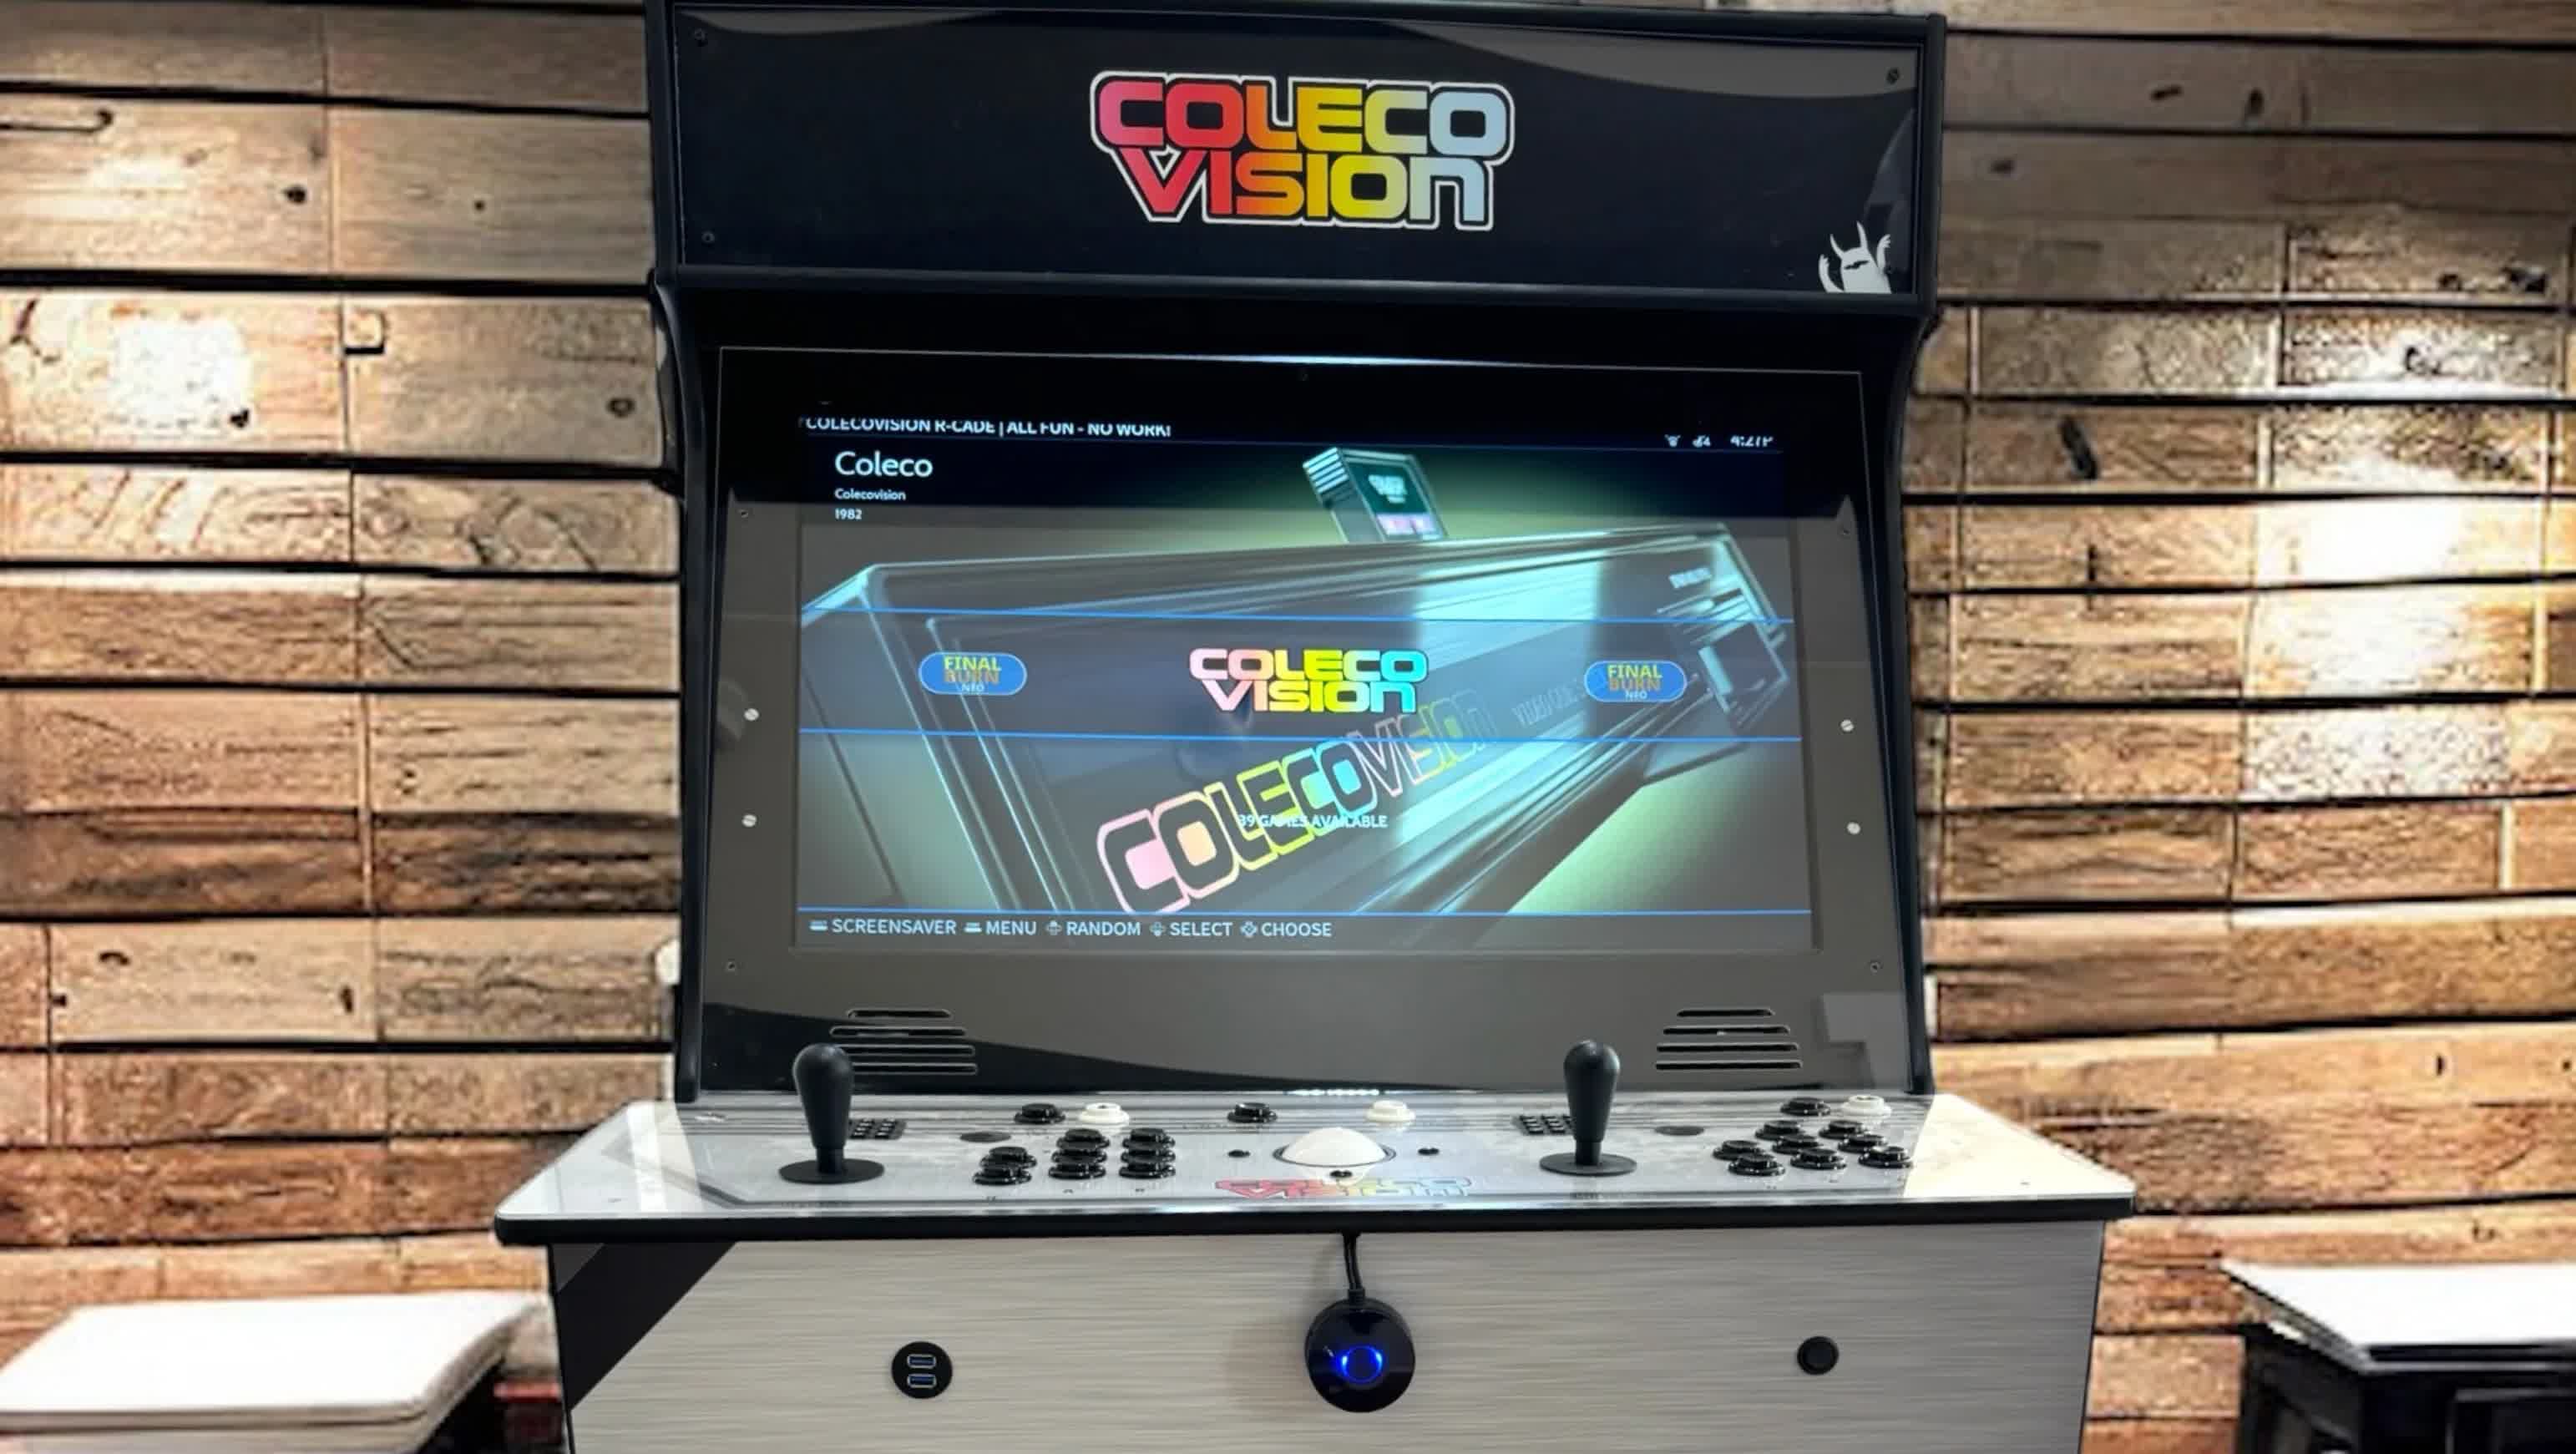 ColecoVision rolls out full-size arcade cabinet with 40 classic games and ROM support